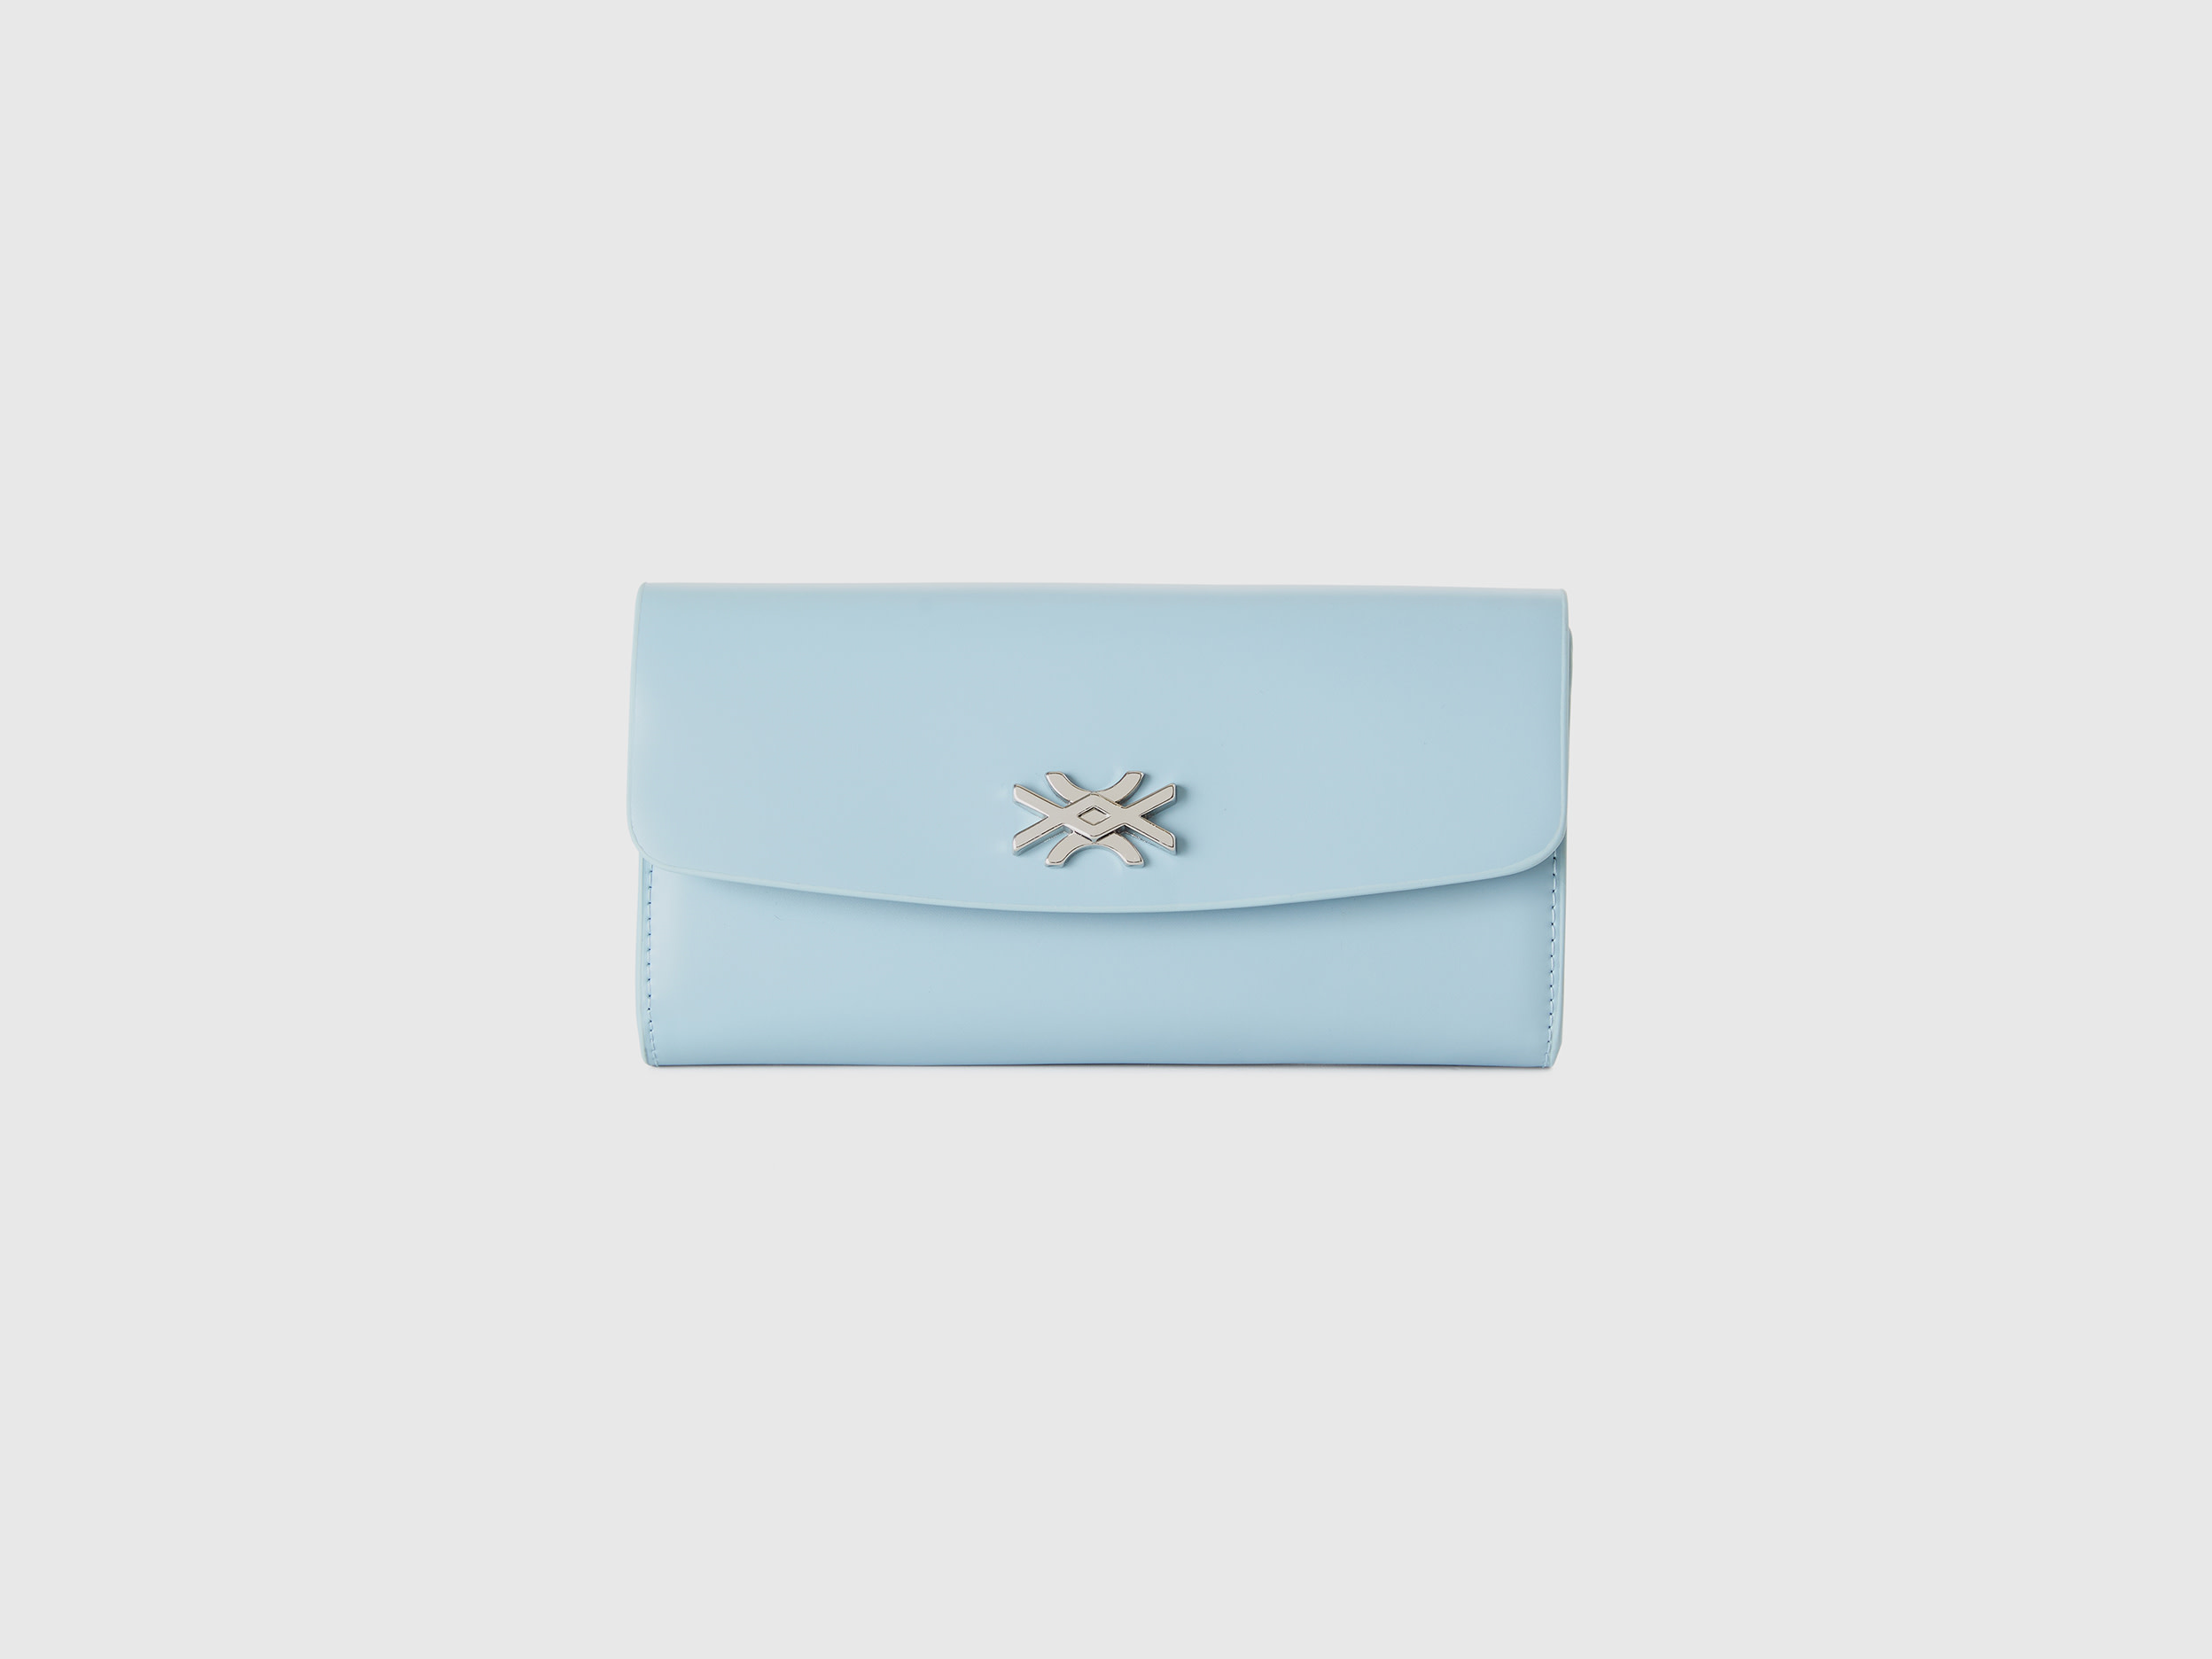 Benetton, Large Wallet In Imitation Leather, size OS, Sky Blue, Women